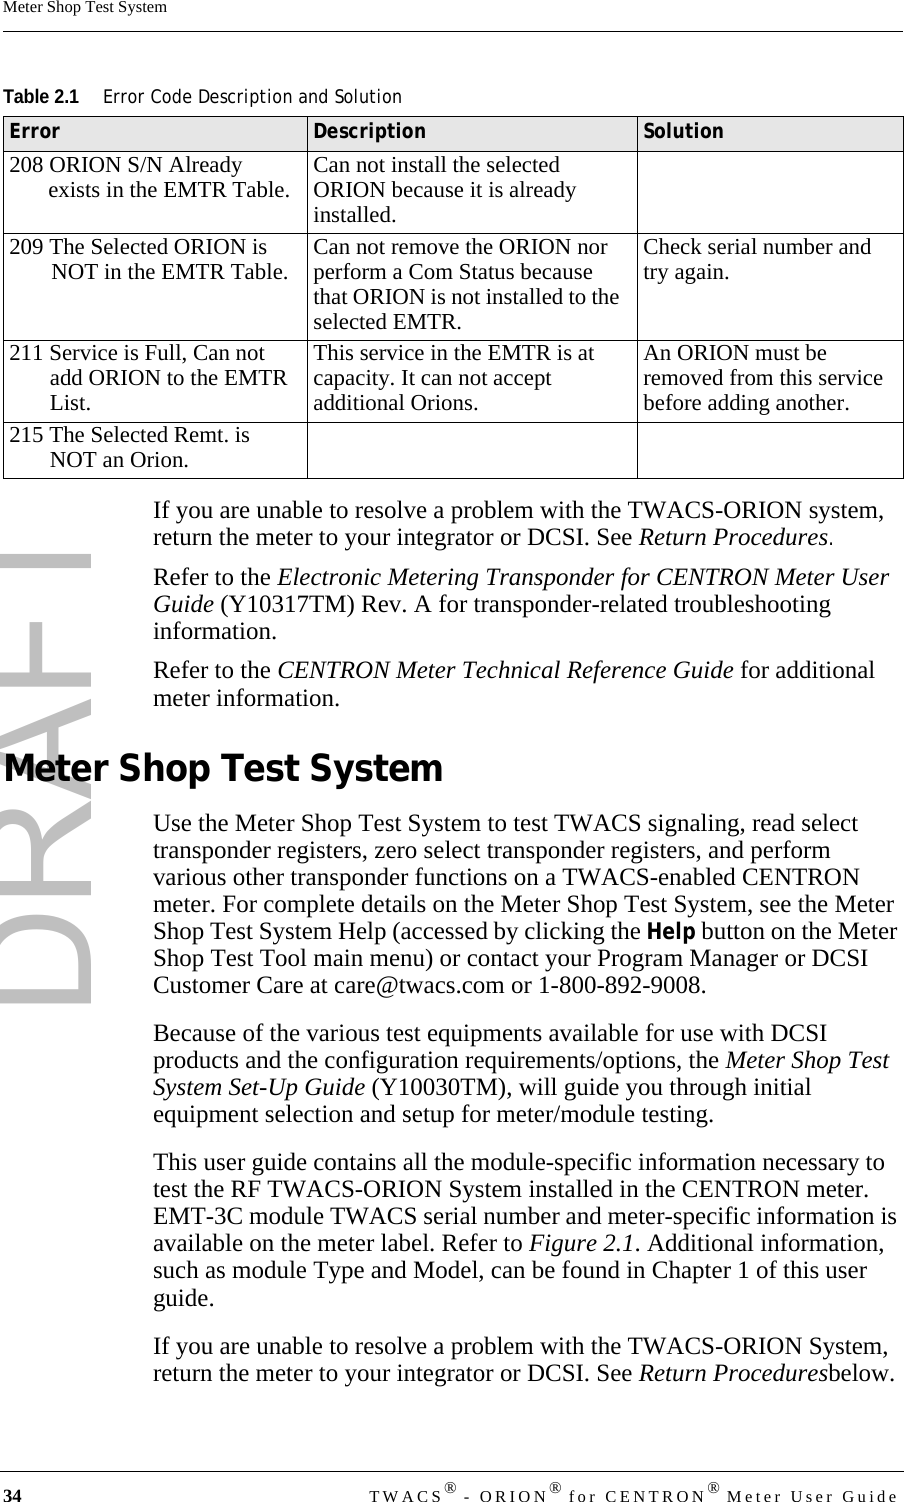 DRAFT34 TWACS® - ORION® for CENTRON® Meter User GuideMeter Shop Test SystemIf you are unable to resolve a problem with the TWACS-ORION system, return the meter to your integrator or DCSI. See Return Procedures.Refer to the Electronic Metering Transponder for CENTRON Meter User Guide (Y10317TM) Rev. A for transponder-related troubleshooting information.Refer to the CENTRON Meter Technical Reference Guide for additional meter information.Meter Shop Test SystemUse the Meter Shop Test System to test TWACS signaling, read select transponder registers, zero select transponder registers, and perform various other transponder functions on a TWACS-enabled CENTRON meter. For complete details on the Meter Shop Test System, see the Meter Shop Test System Help (accessed by clicking the Help button on the Meter Shop Test Tool main menu) or contact your Program Manager or DCSI Customer Care at care@twacs.com or 1-800-892-9008.Because of the various test equipments available for use with DCSI products and the configuration requirements/options, the Meter Shop Test System Set-Up Guide (Y10030TM), will guide you through initial equipment selection and setup for meter/module testing. This user guide contains all the module-specific information necessary to test the RF TWACS-ORION System installed in the CENTRON meter. EMT-3C module TWACS serial number and meter-specific information is available on the meter label. Refer to Figure 2.1. Additional information, such as module Type and Model, can be found in Chapter 1 of this user guide.If you are unable to resolve a problem with the TWACS-ORION System, return the meter to your integrator or DCSI. See Return Proceduresbelow.208 ORION S/N Already exists in the EMTR Table. Can not install the selected ORION because it is already installed.209 The Selected ORION is NOT in the EMTR Table. Can not remove the ORION nor perform a Com Status because that ORION is not installed to the selected EMTR. Check serial number and try again.211 Service is Full, Can not add ORION to the EMTR List.This service in the EMTR is at capacity. It can not accept additional Orions.An ORION must be removed from this service before adding another.215 The Selected Remt. is NOT an Orion.Table 2.1Error Code Description and SolutionError Description Solution